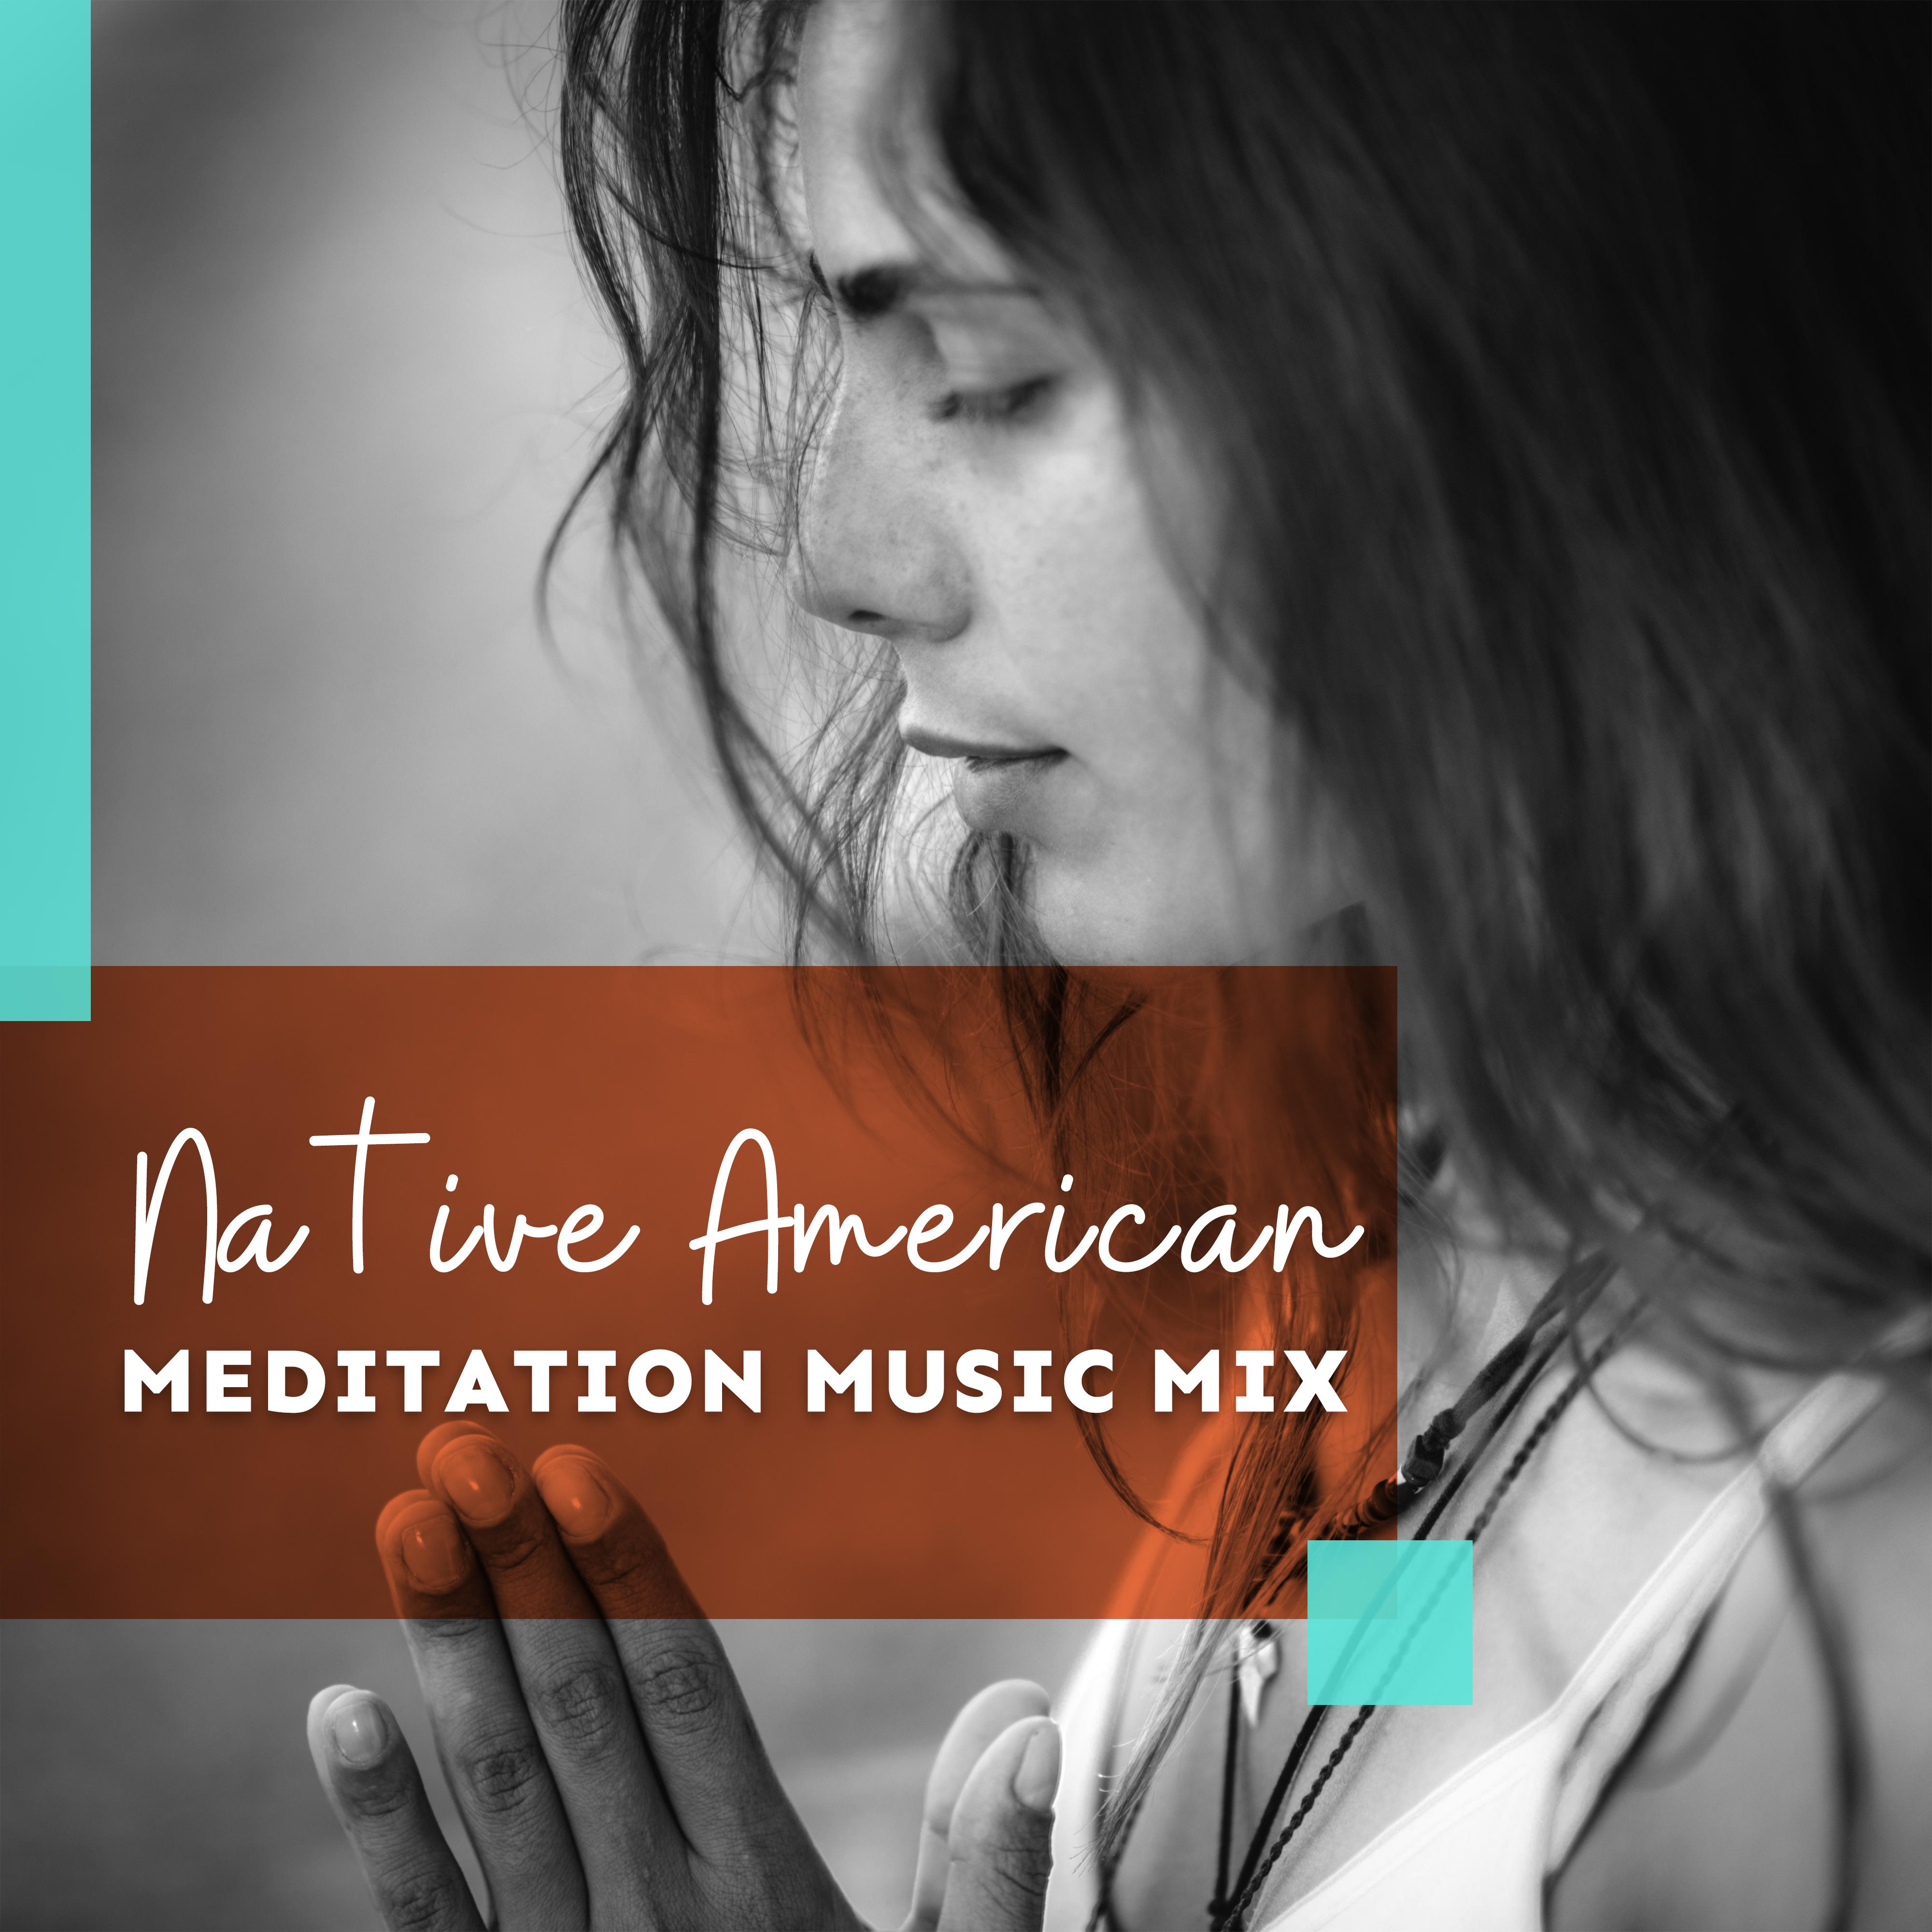 Native American Meditation Music Mix  Compilation of 2019 New Age Ambient Music with Native Instruments  Sounds